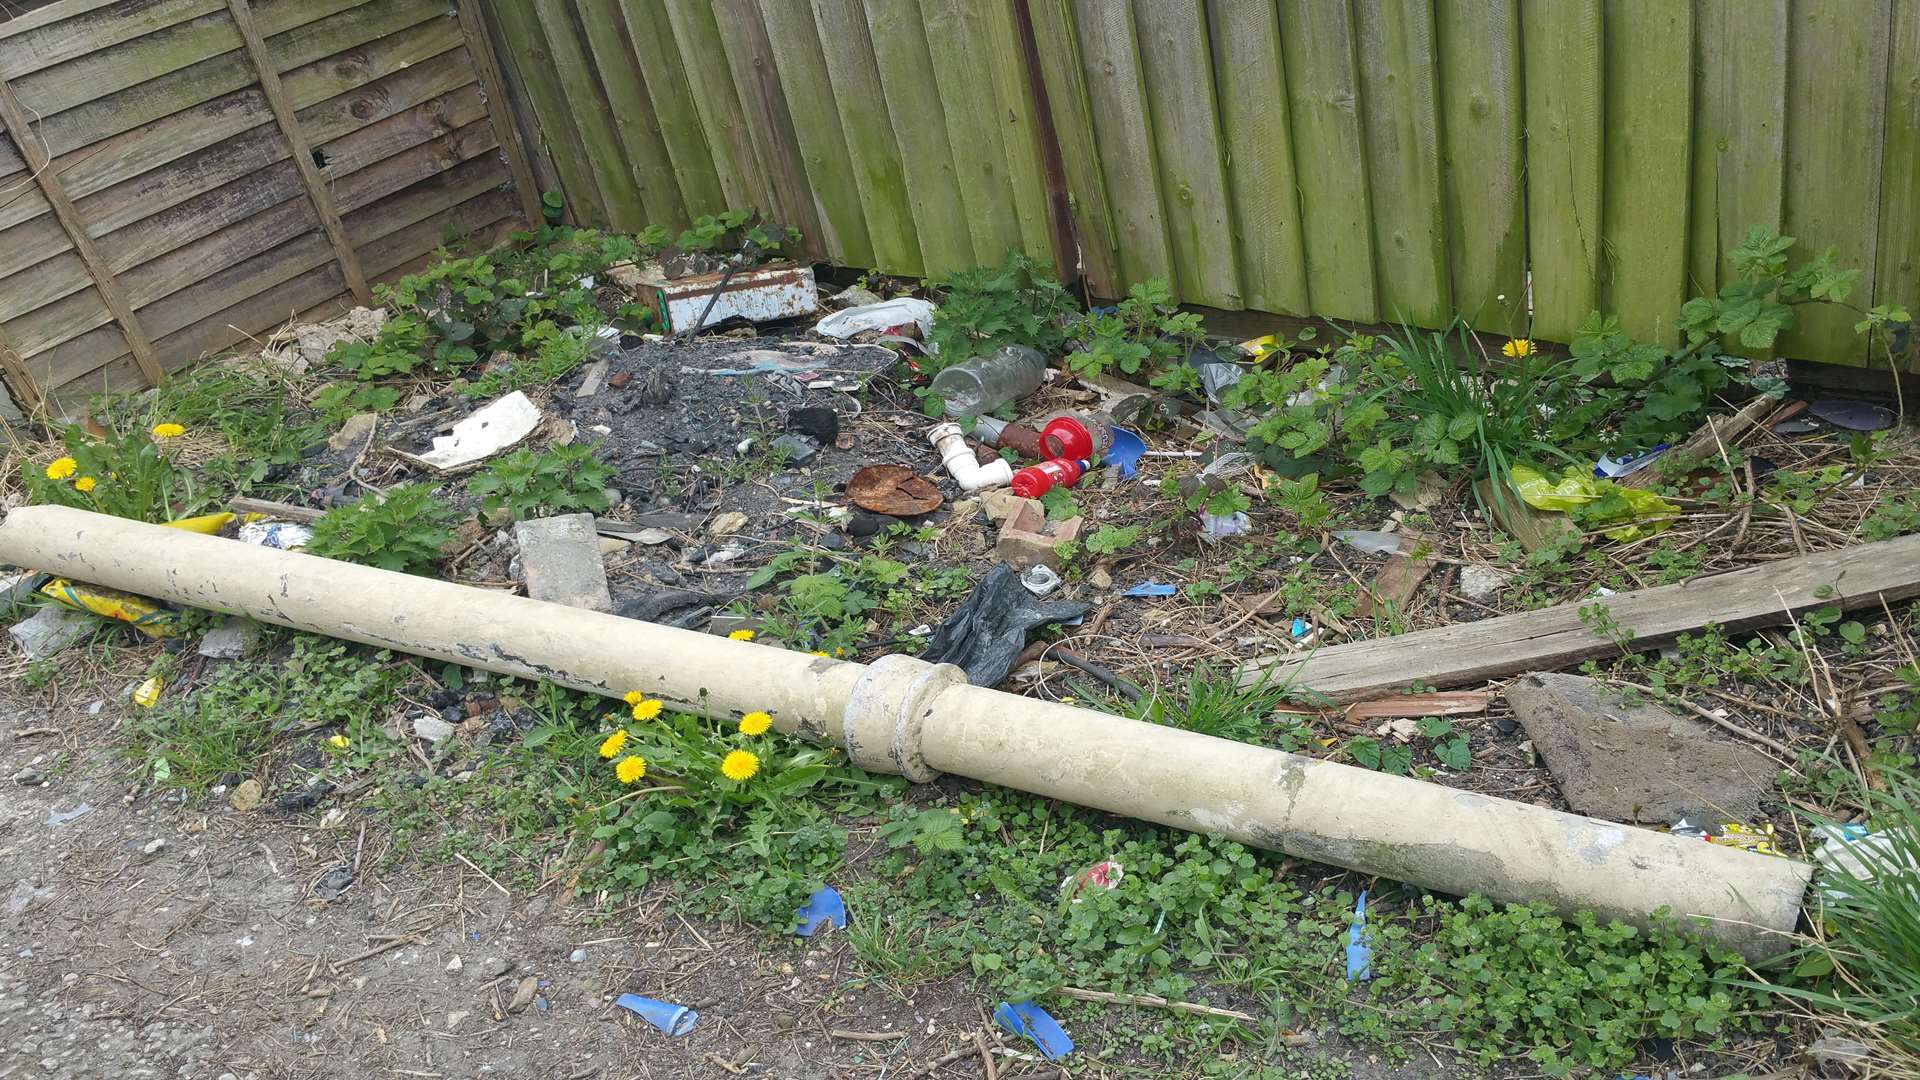 Adrian Swift fears children may have come into contact with this drainpipe which could contain asbestos.